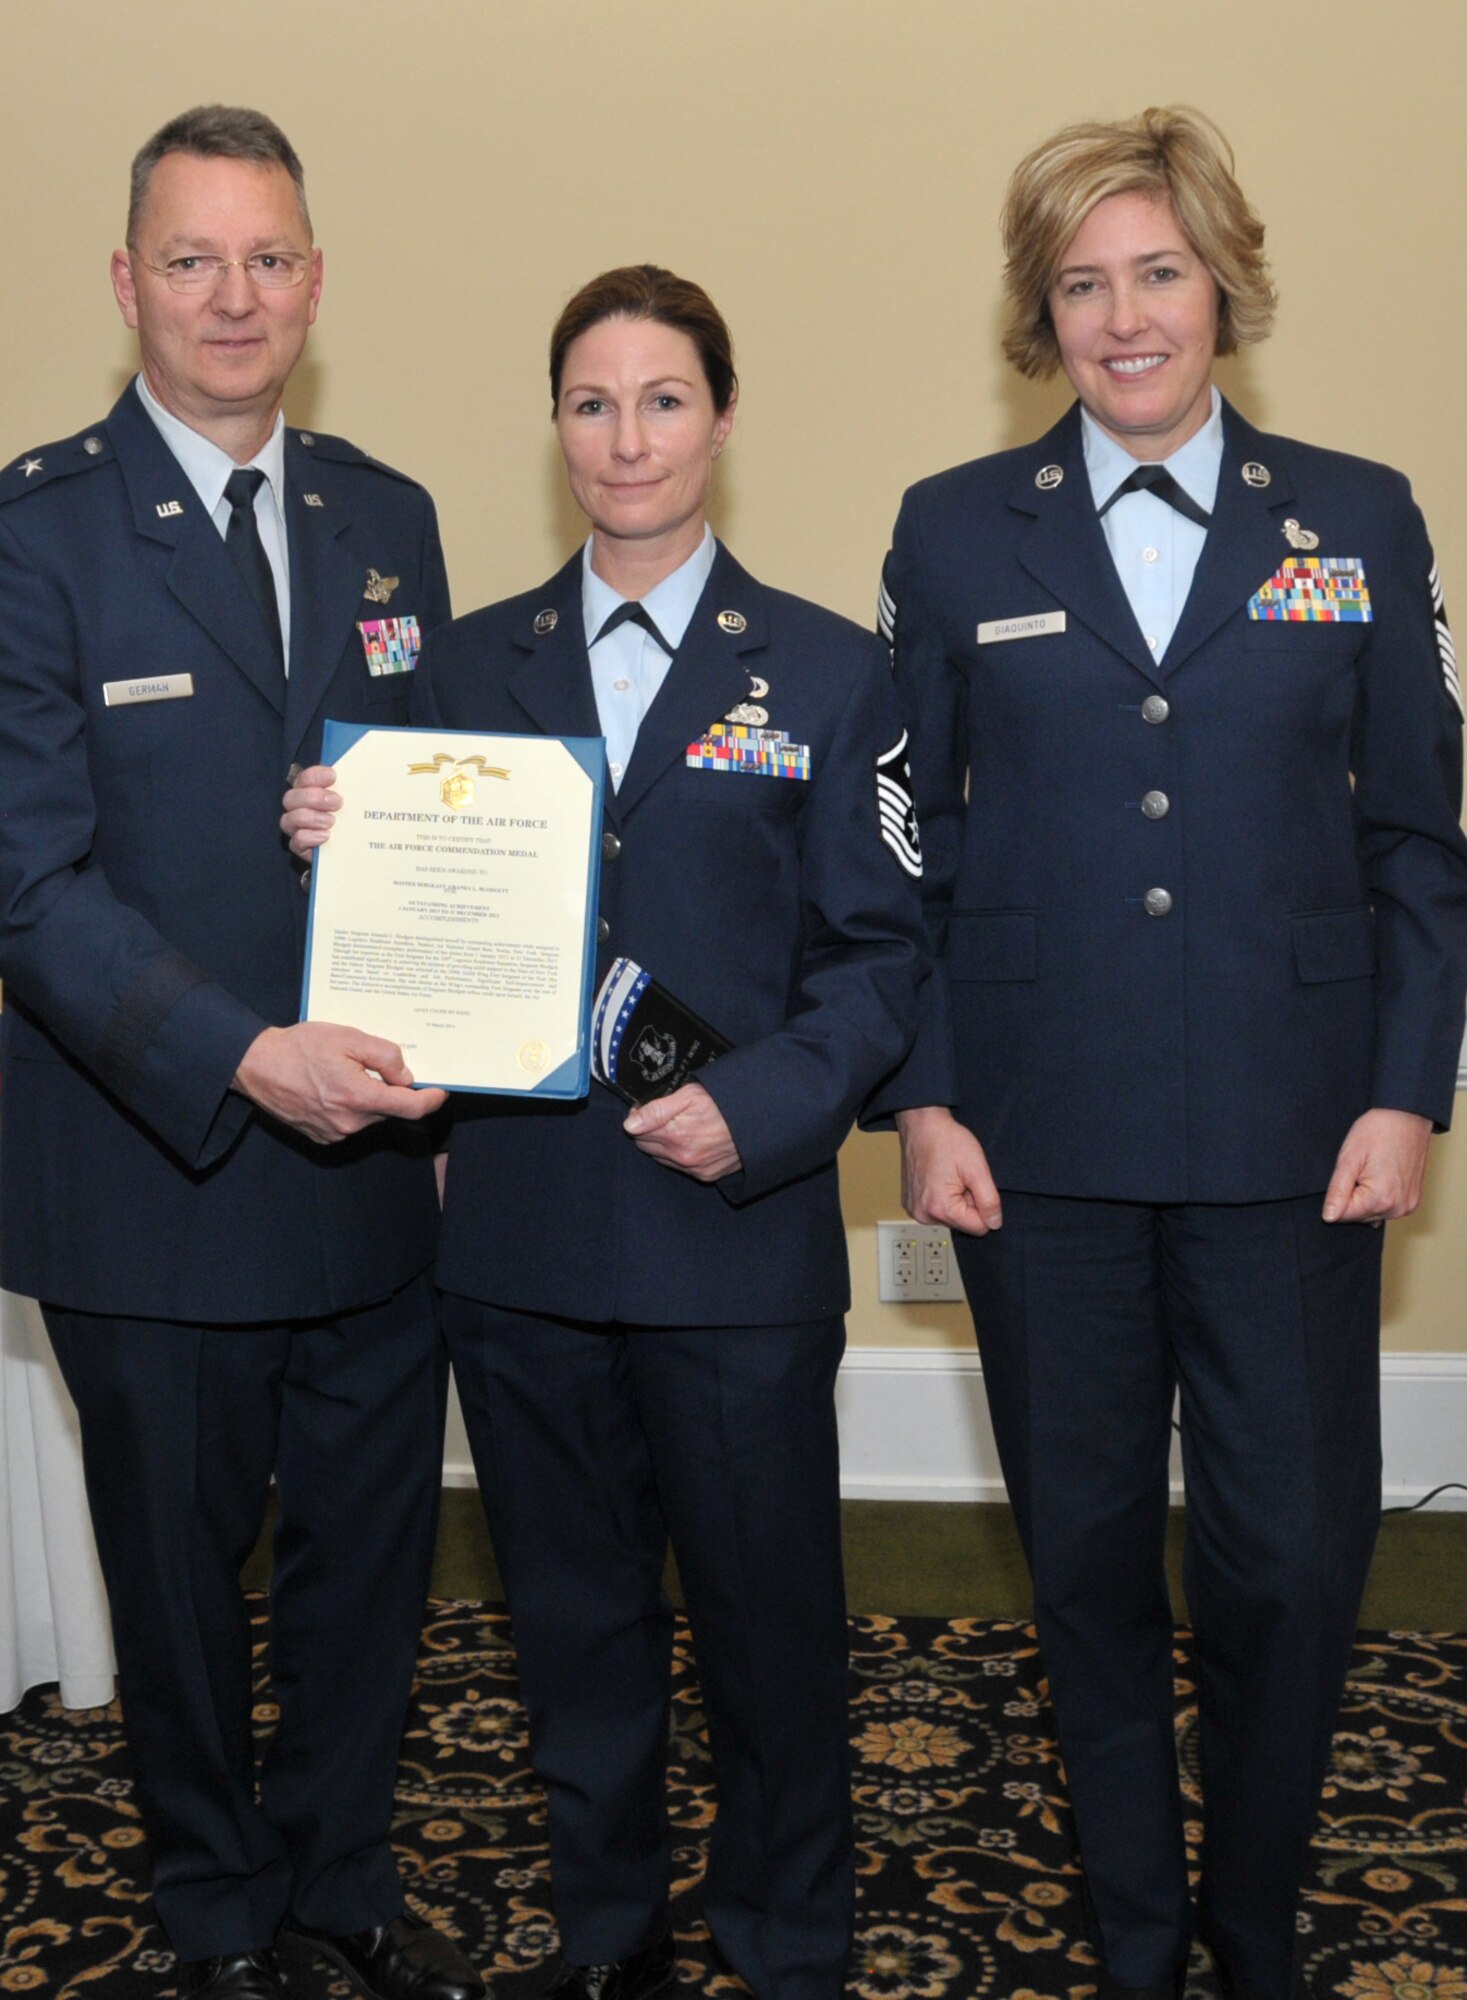 SCOTIA, N.Y. -- Master Sgt. Amanda Blodgett, center, was named the 109th Airlift Wing's First Sergeant of the Year. She was honored during the annual Airman of the Year Dinner on April 5. Also pictured are Brig. Gen. Anthony German, New York's Chief of Staff-Air, and Chief Master Sgt. Amy Giaquinto, 109th AW command chief.  Blodgett is assigned to the 109th Logistics Readiness Squadron. (Air National Guard photo by Master Sgt. William Gizara/Released)